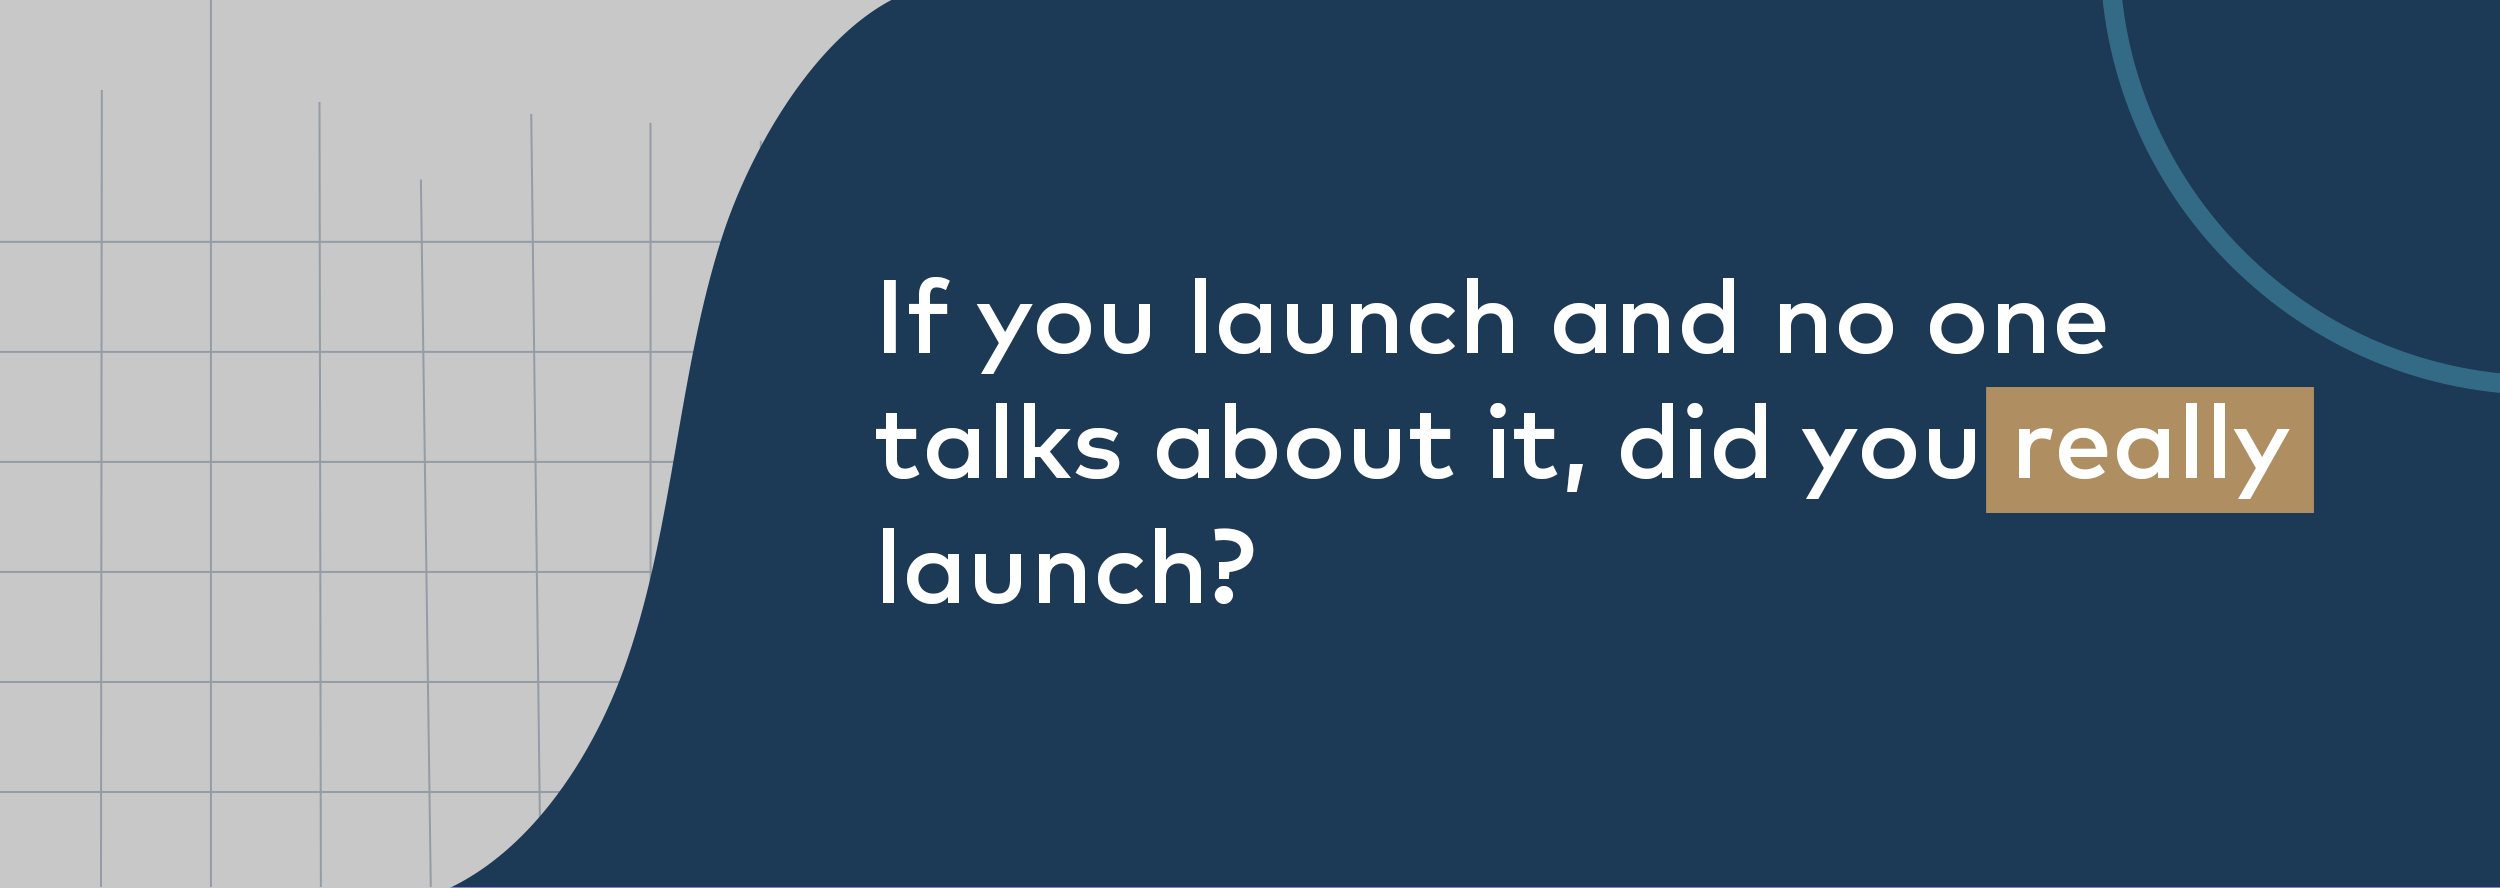 If you launch and no one talks about it, did you really launch?